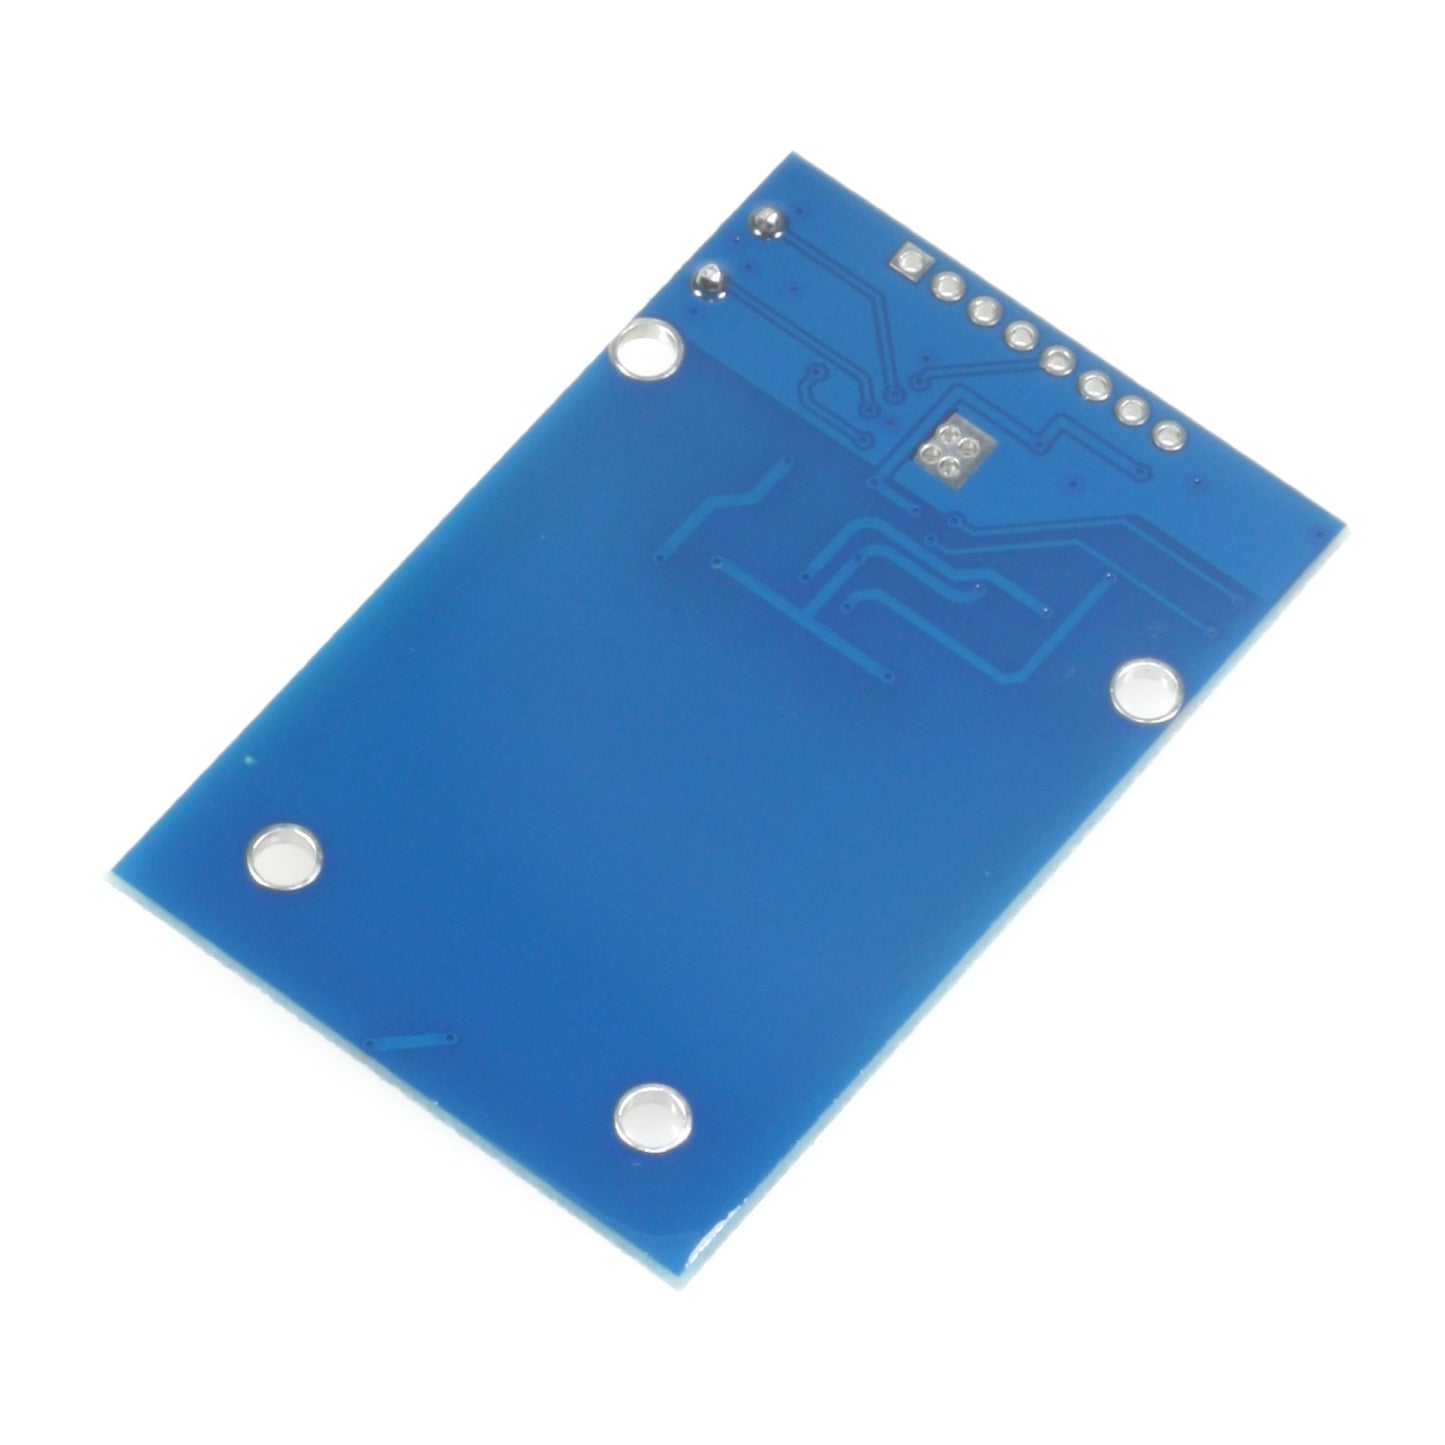 RFID-Kit RC522 with MIFARE Transponder and Card